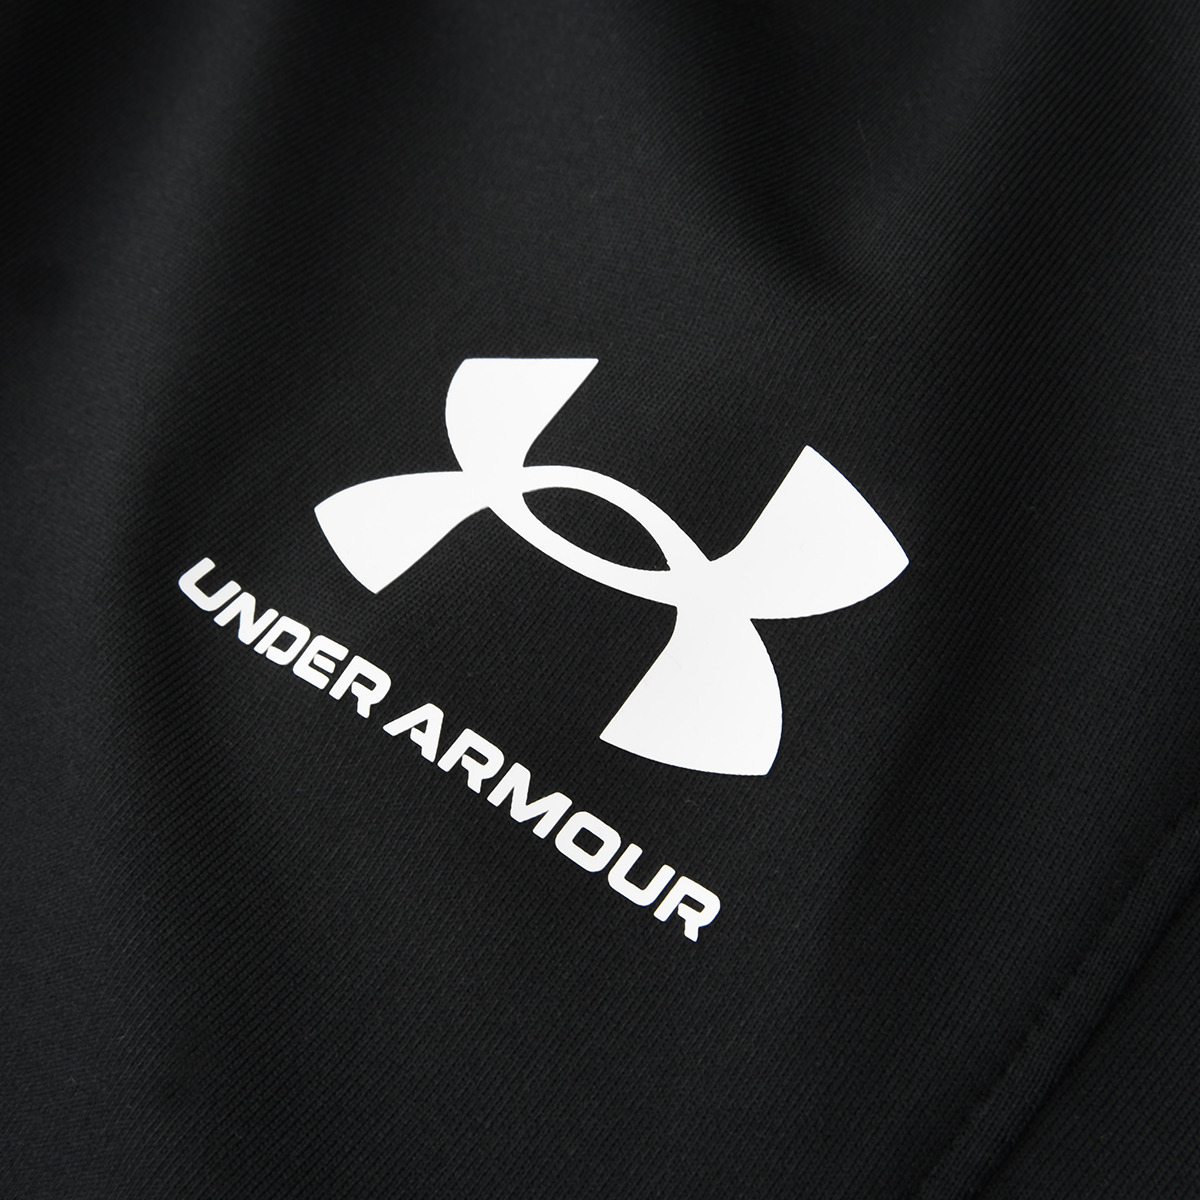 Pantalon Under Armour Challenger,  image number null